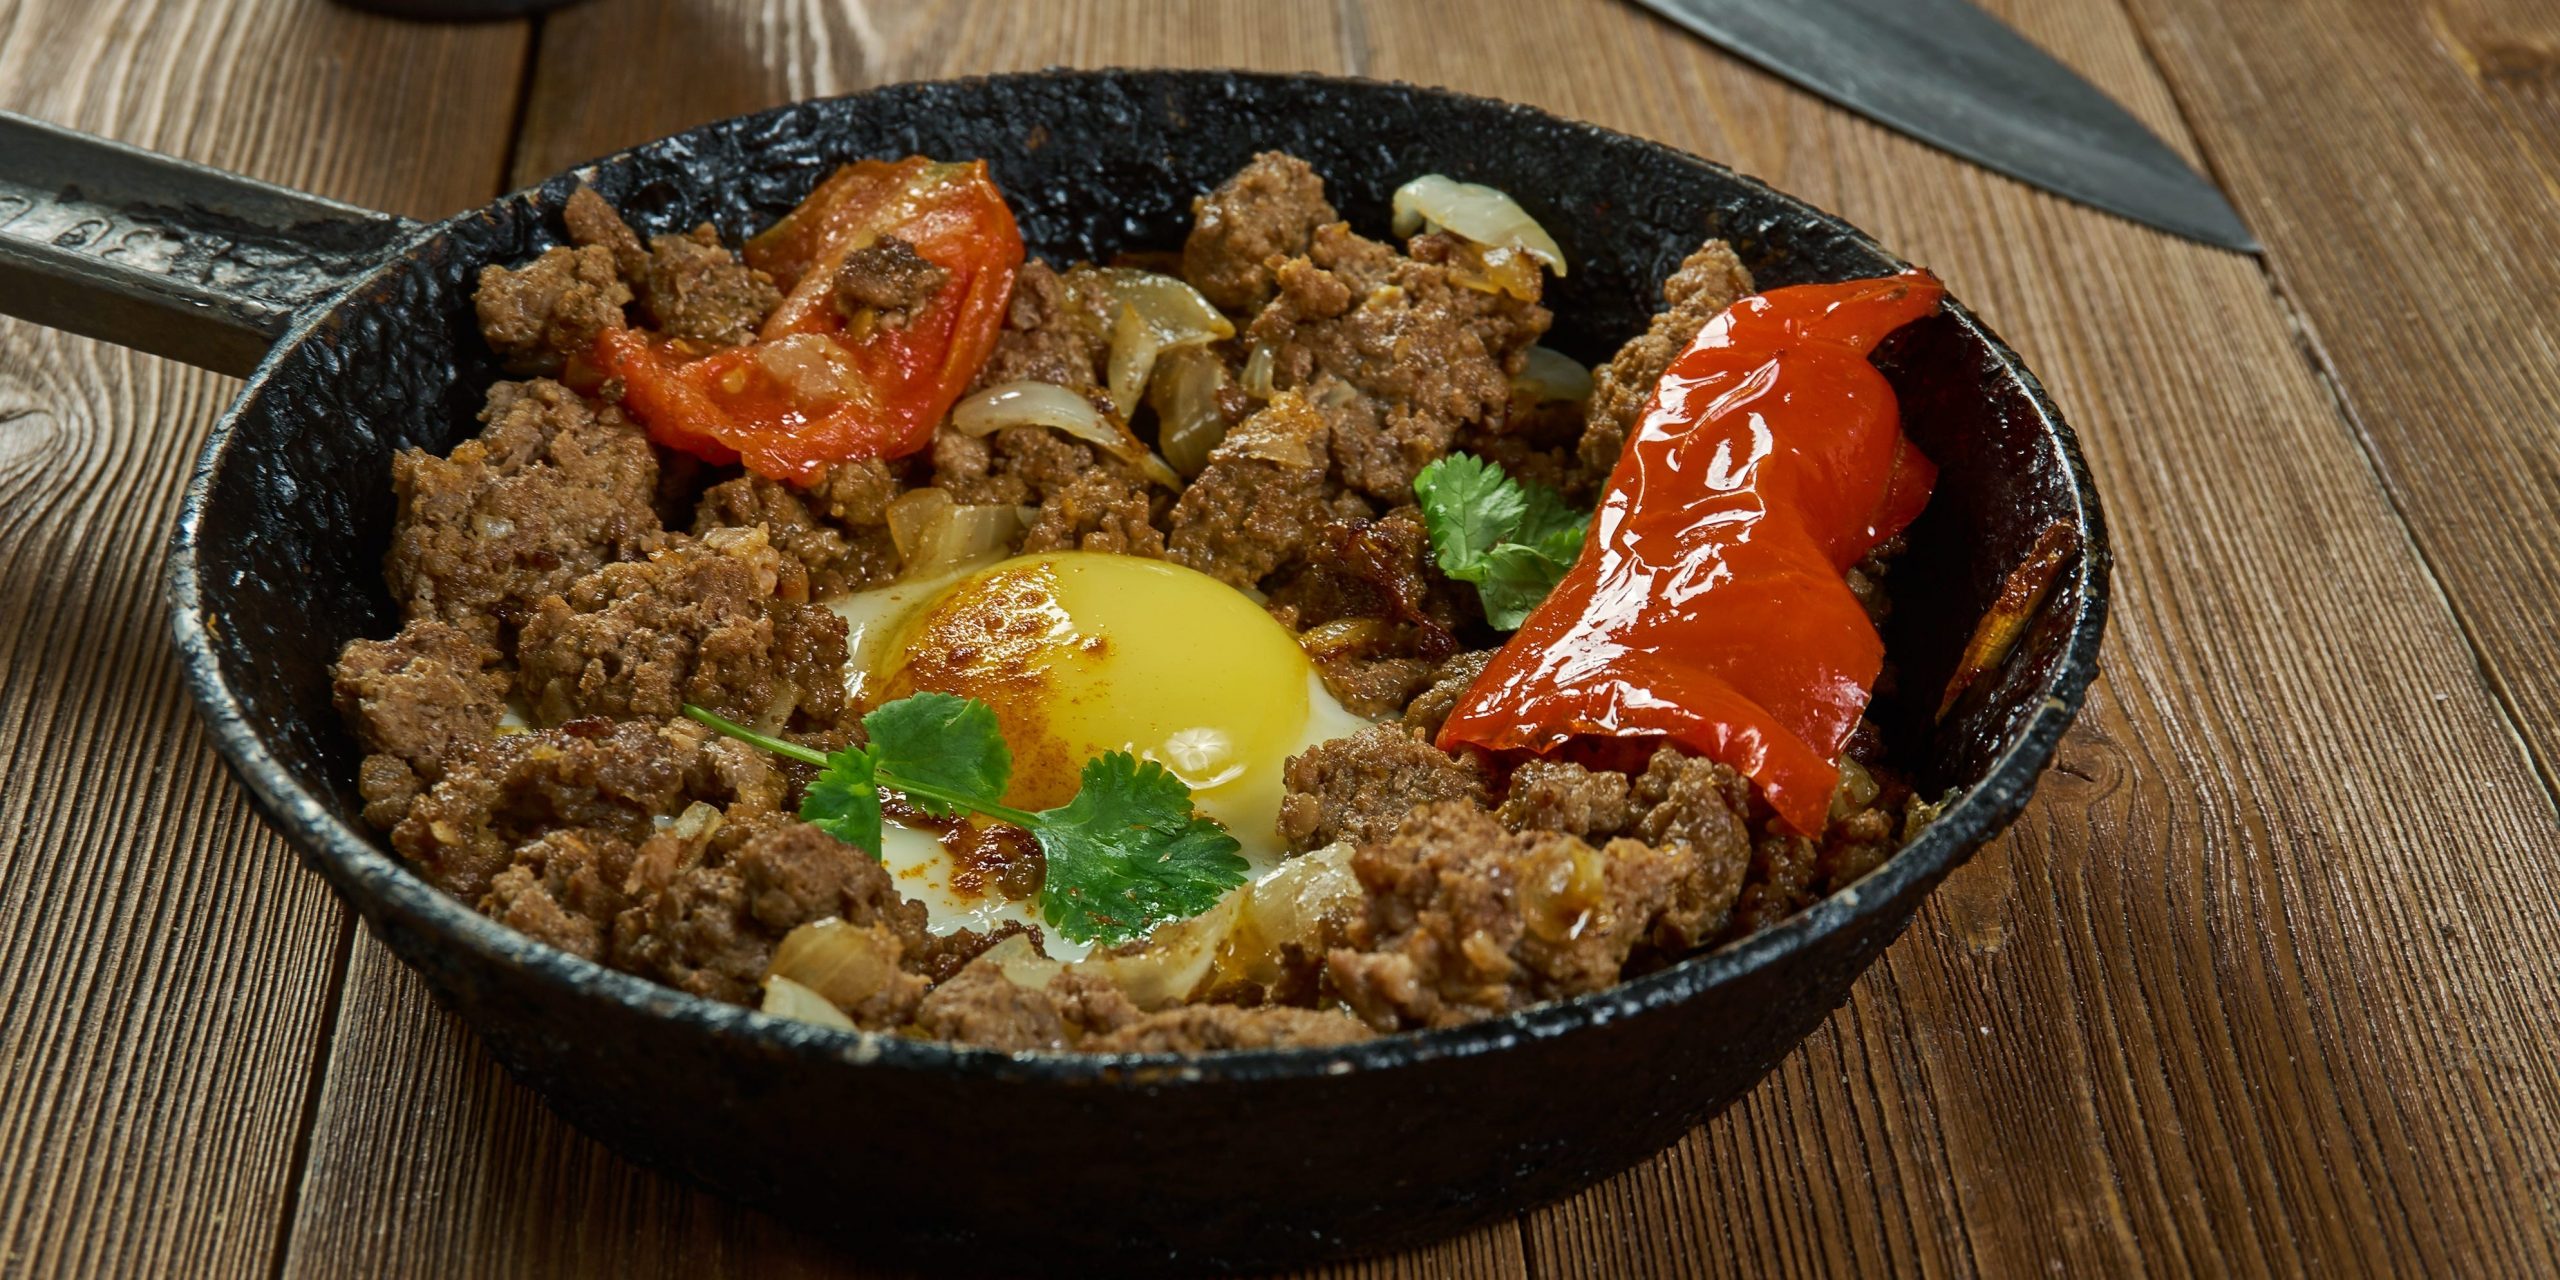 Makhlama Lahm - Iraqi Eggs with Lamb and Tomatoes, breakfast dish, ground lamb is sautéed with onions, tomatoes, and parsley, seasoned